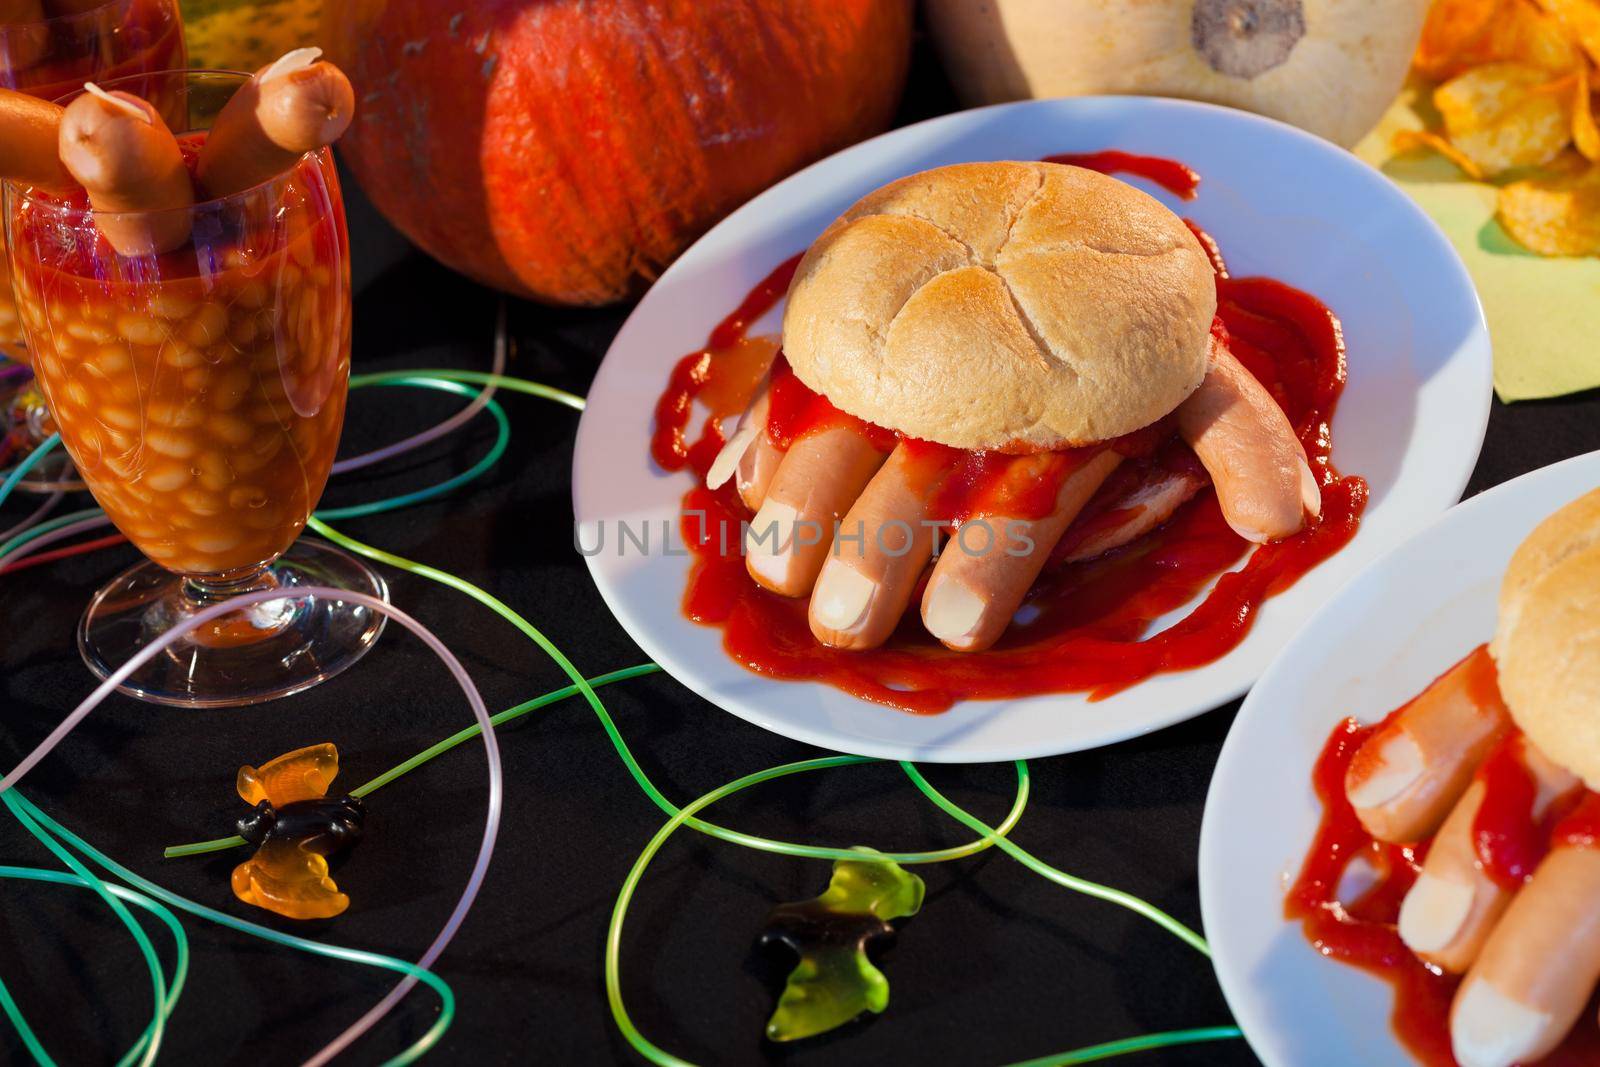 Burger and human hand food ideas for halloween by Kzenon